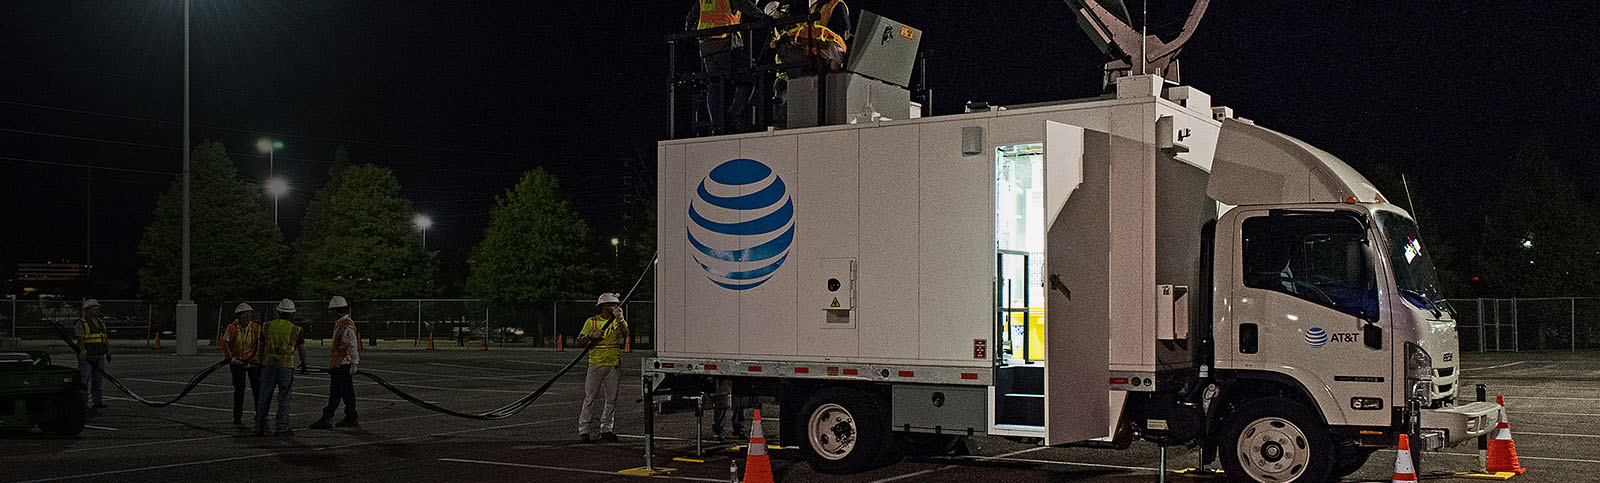 AT&T FirstNet first responders working at night in Wright County